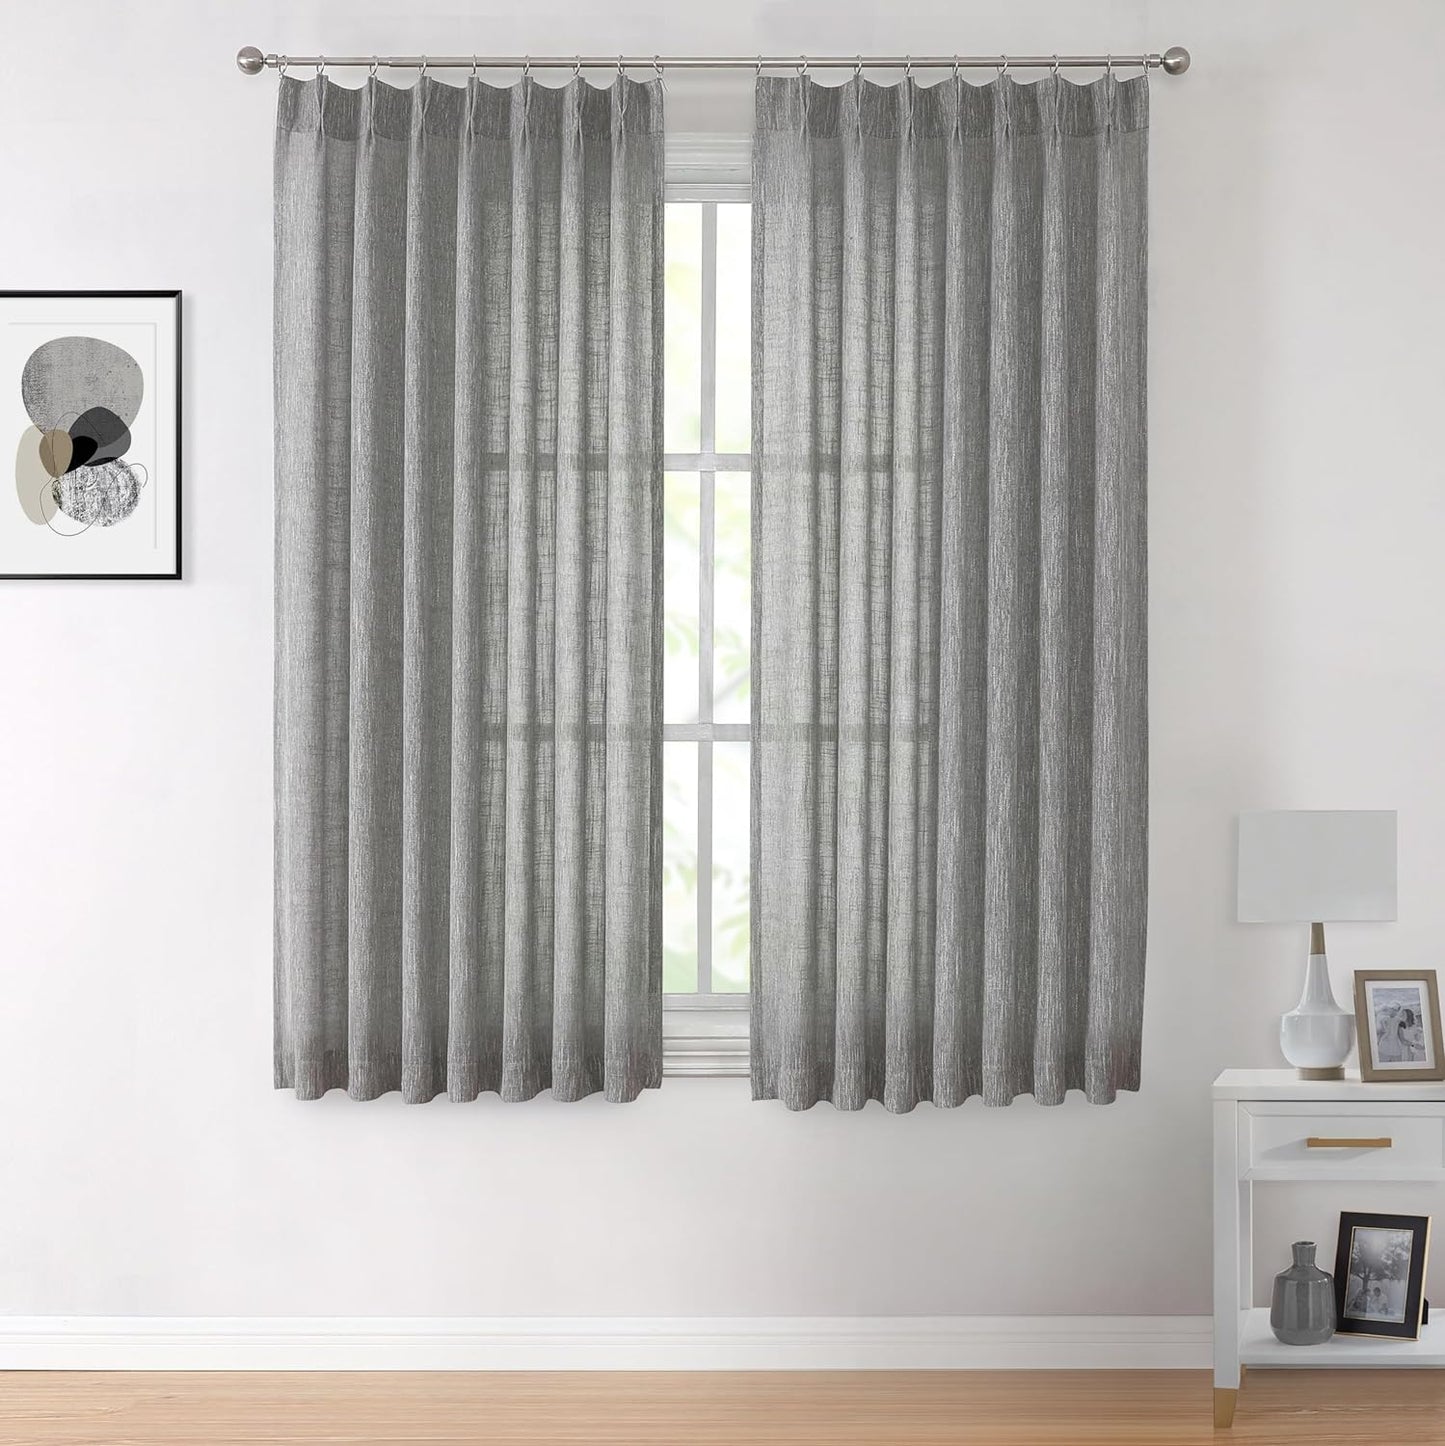 Vision Home Natural Pinch Pleated Semi Sheer Curtains Textured Linen Blended Light Filtering Window Curtains 84 Inch for Living Room Bedroom Pinch Pleat Drapes with Hooks 2 Panels 42" Wx84 L  Vision Home Charcoal Grey/Pinch 40"X72"X2 